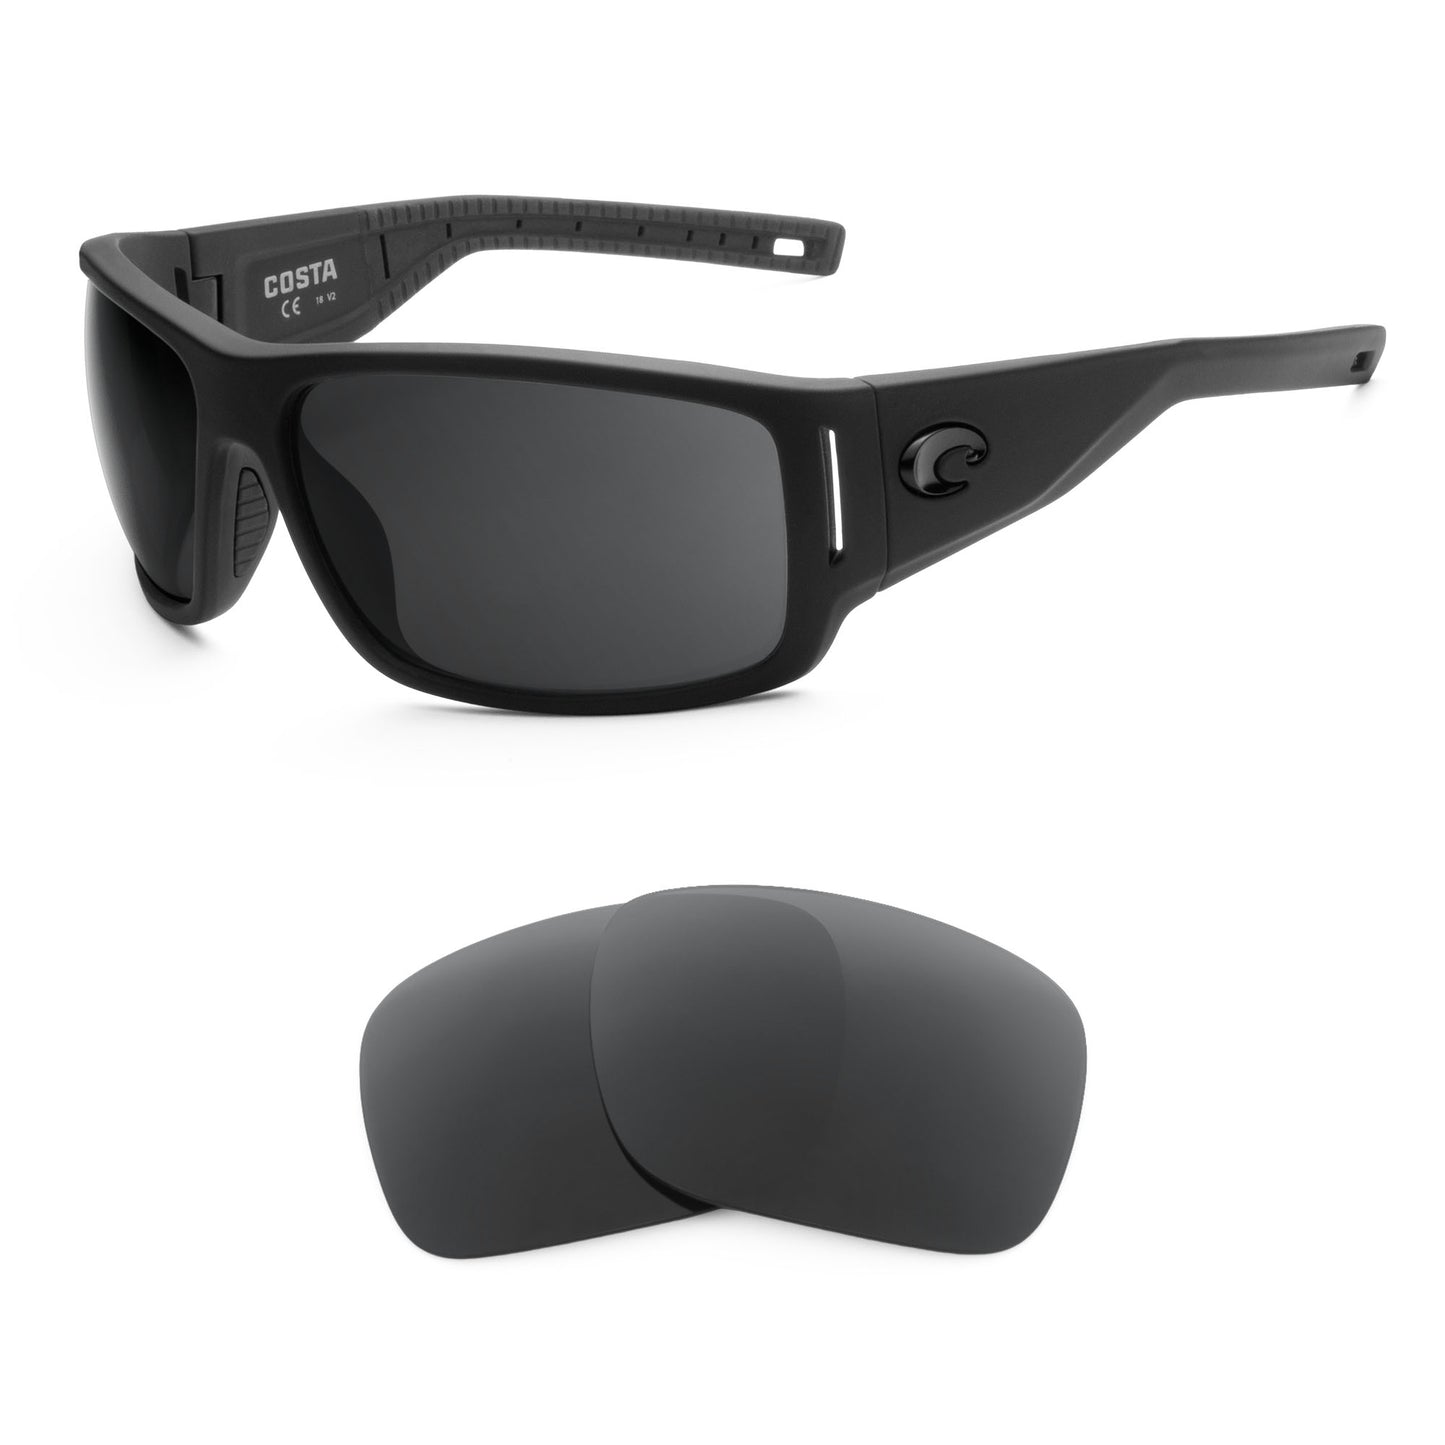 Costa Cape sunglasses with replacement lenses